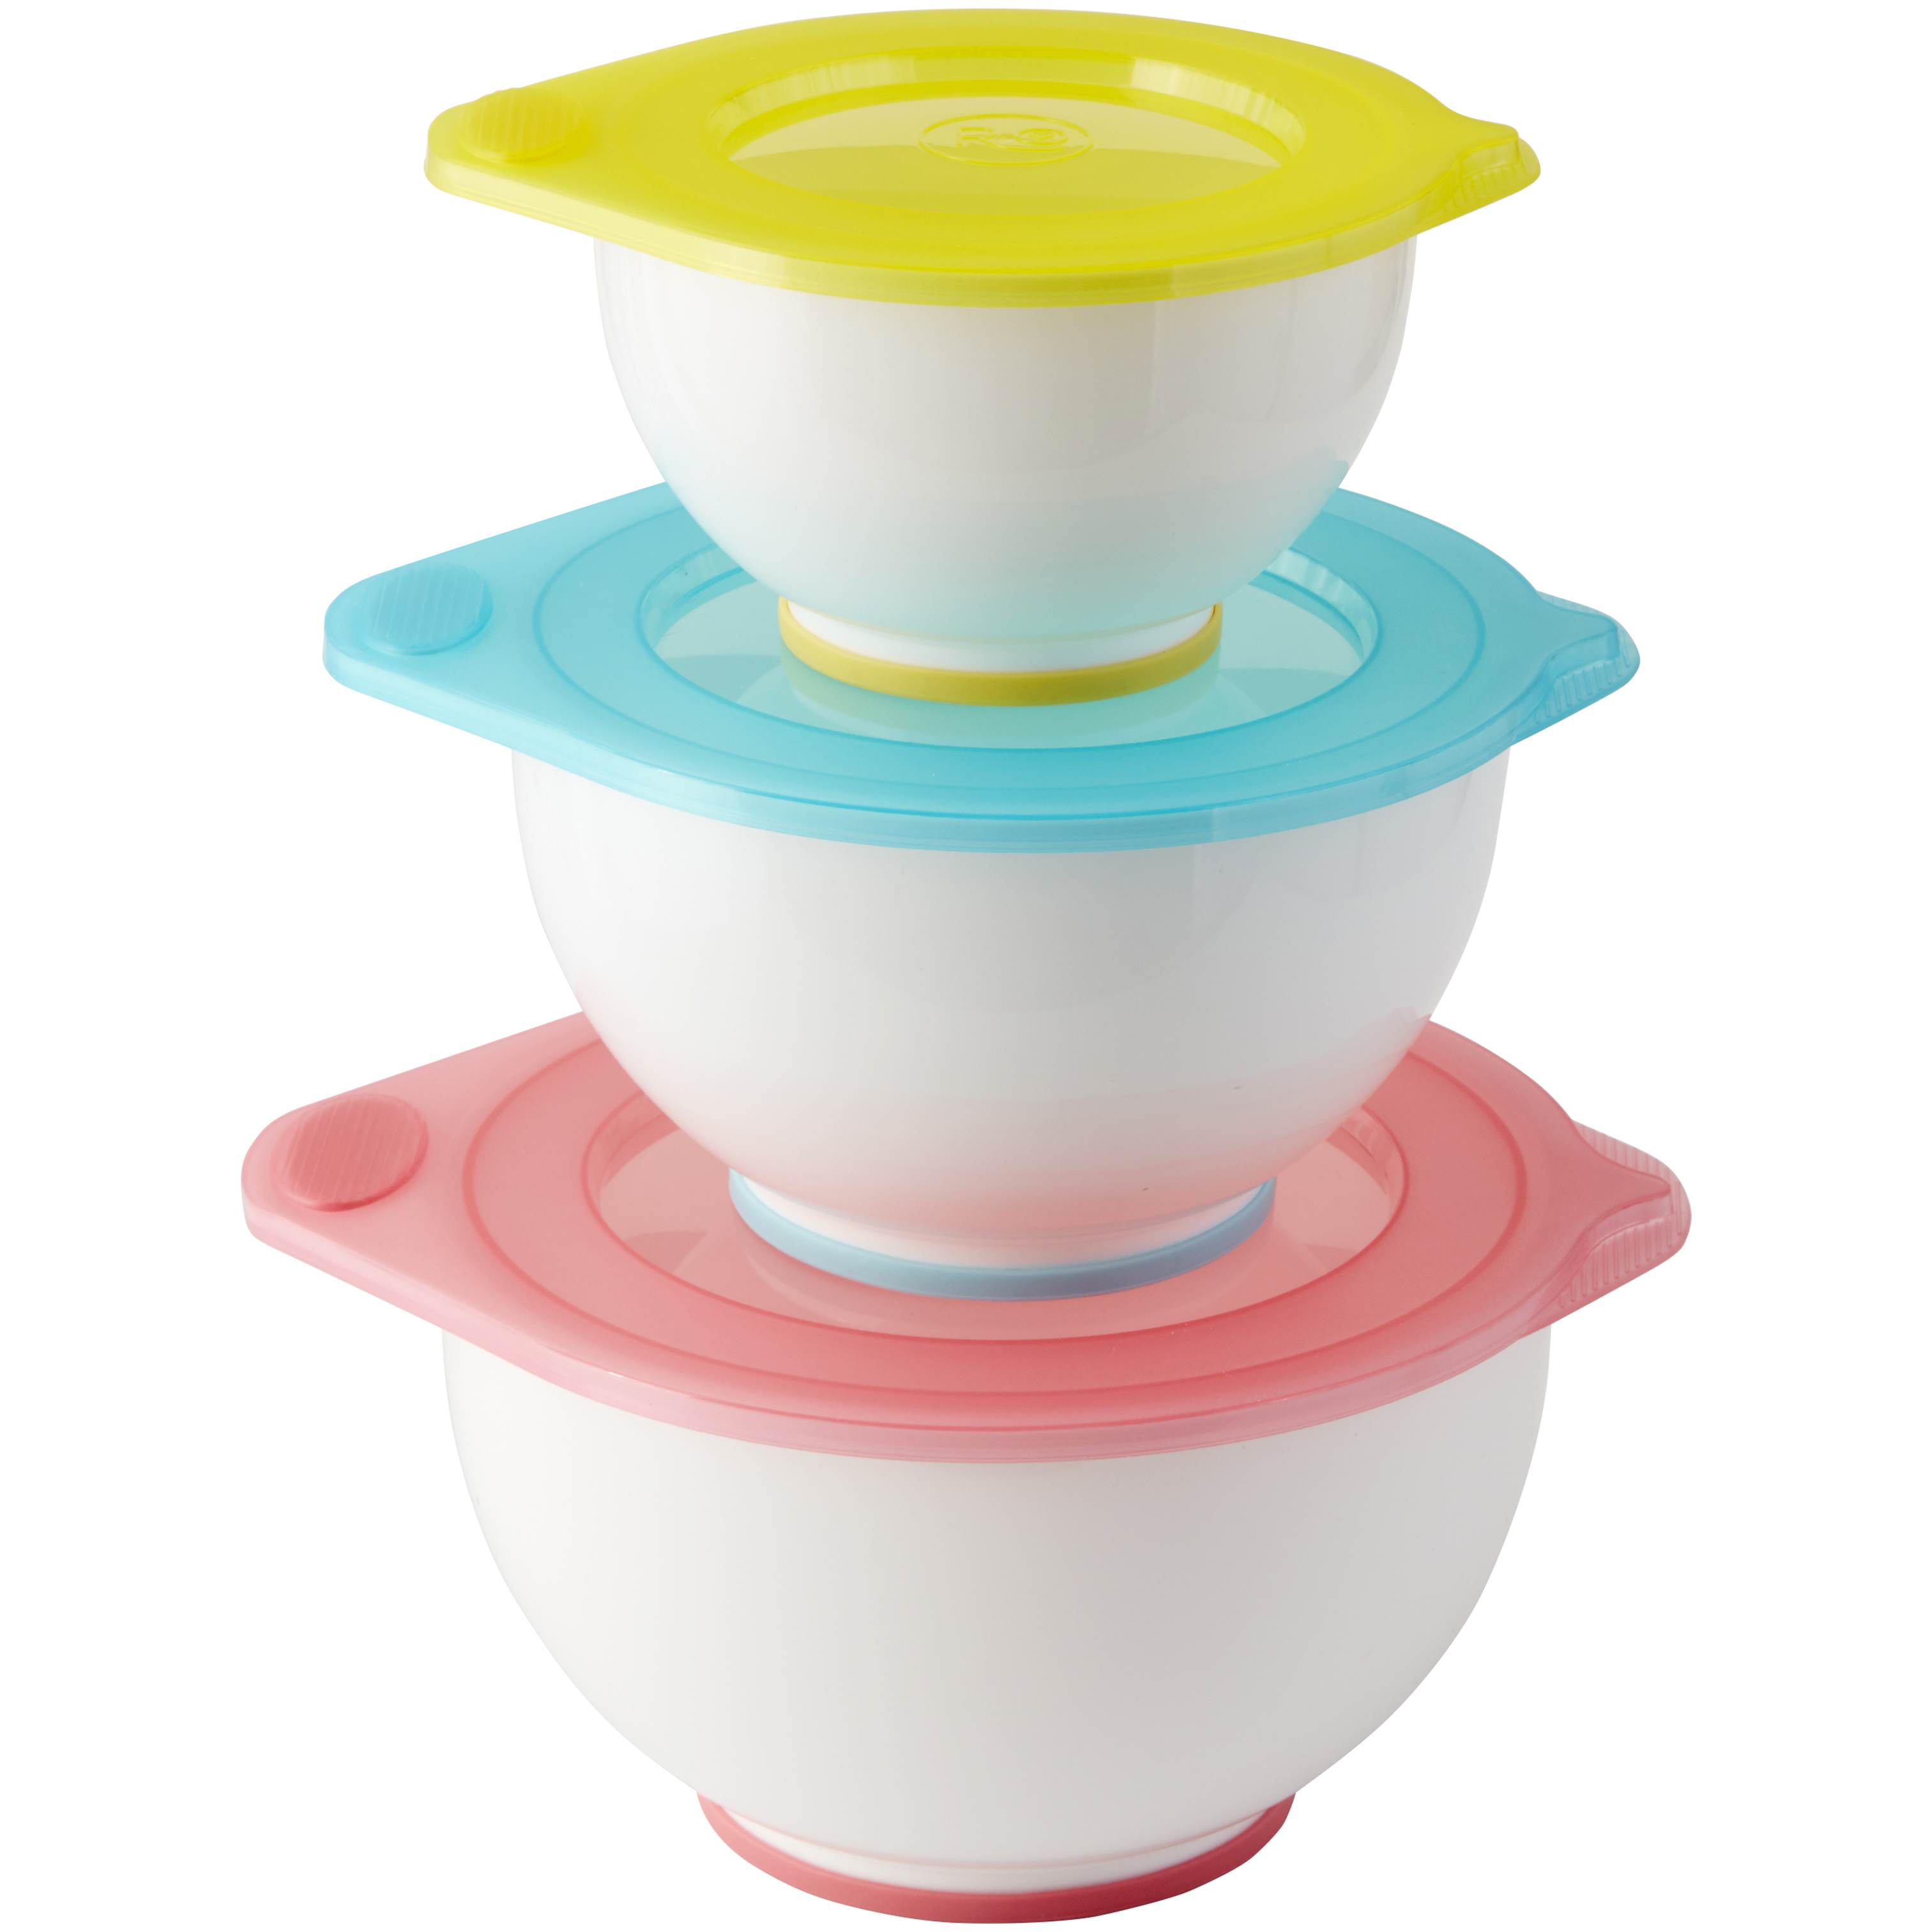 ROSANNA PANSINO by Wilton Mixing Bowl with Lids Set, 6-Piece - image 5 of 13